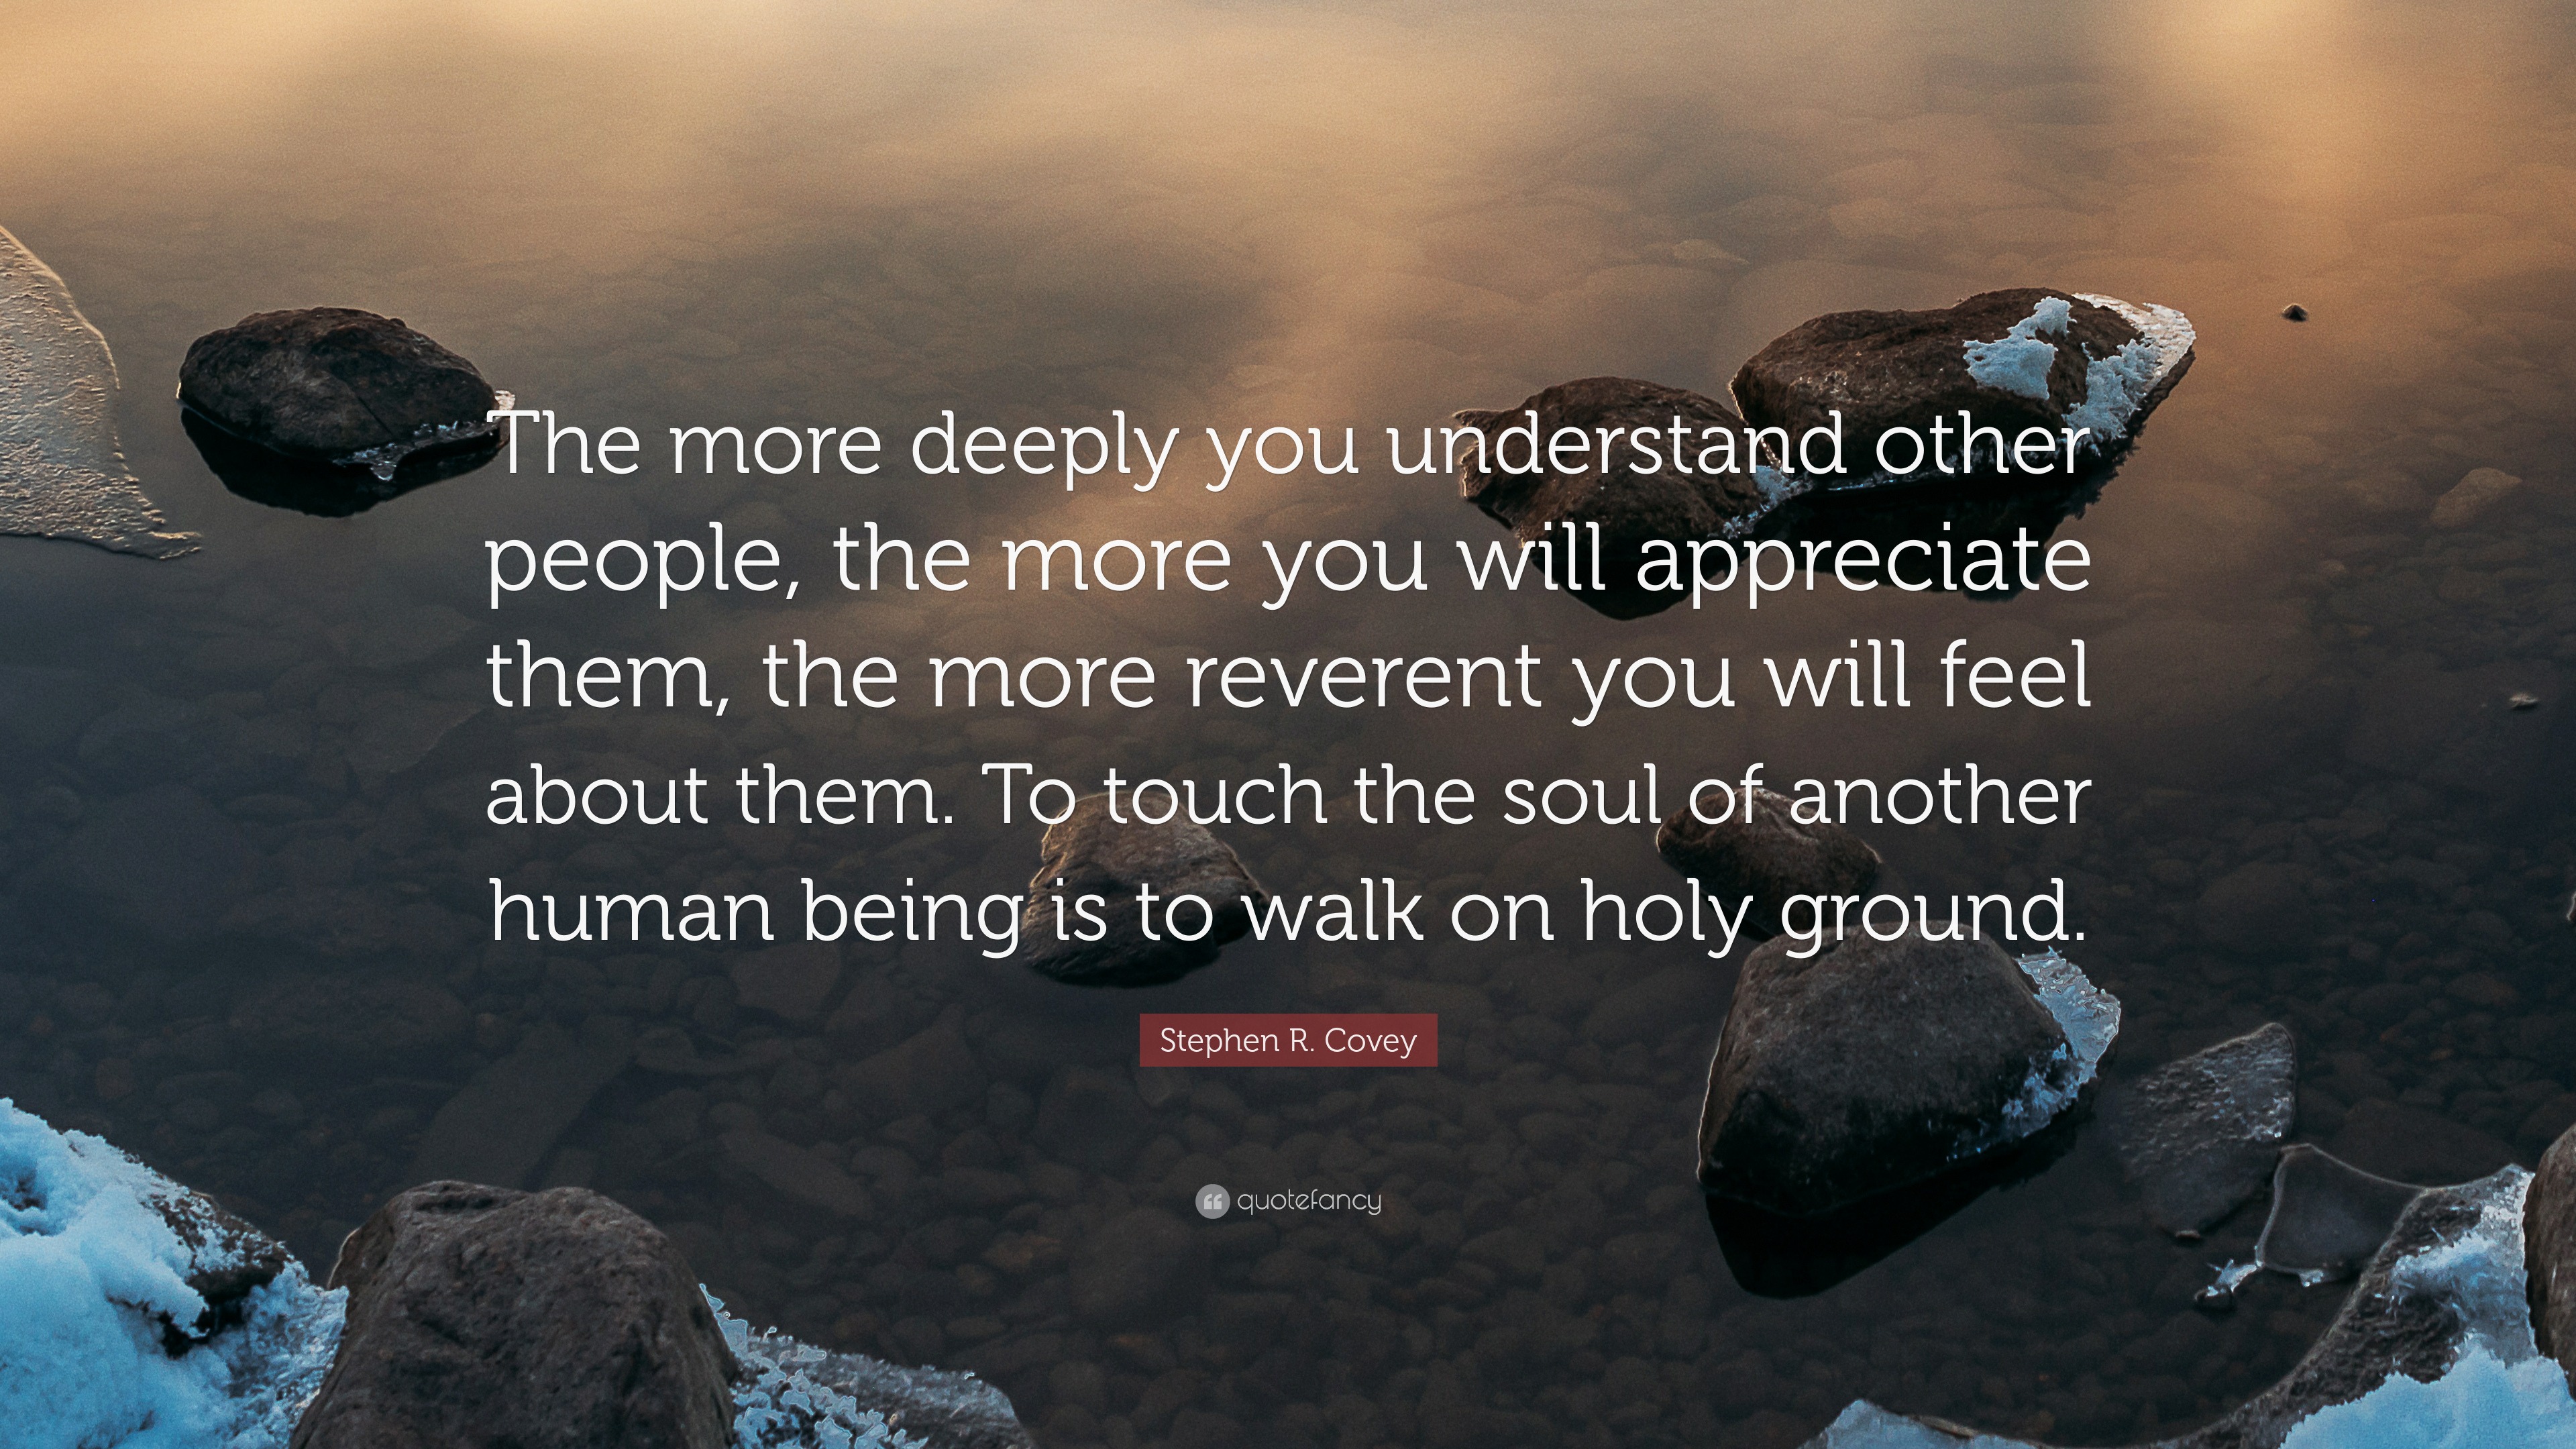 Stephen R. Covey Quote: “The more deeply you understand other people ...